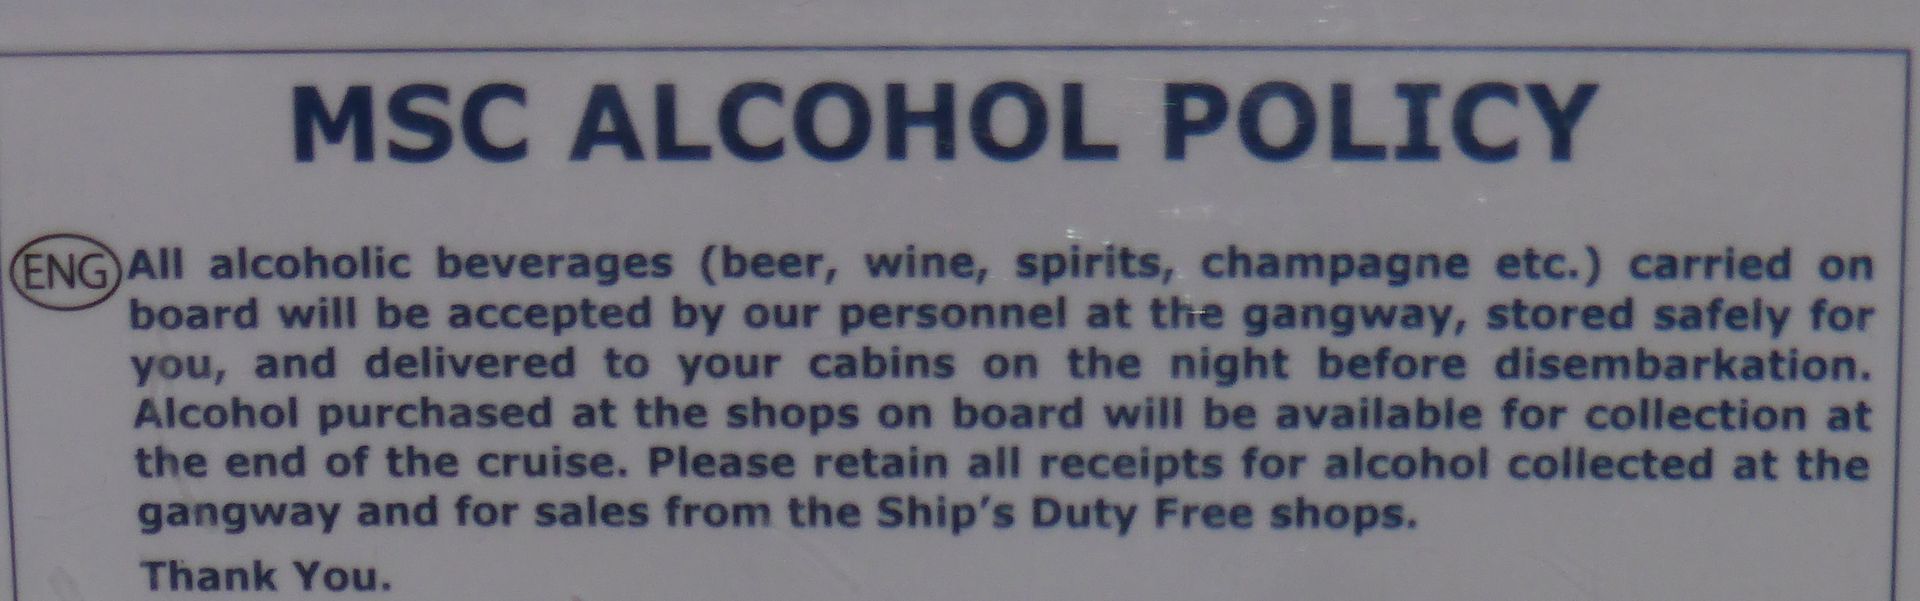 Alcohol%20policy%202.jpg